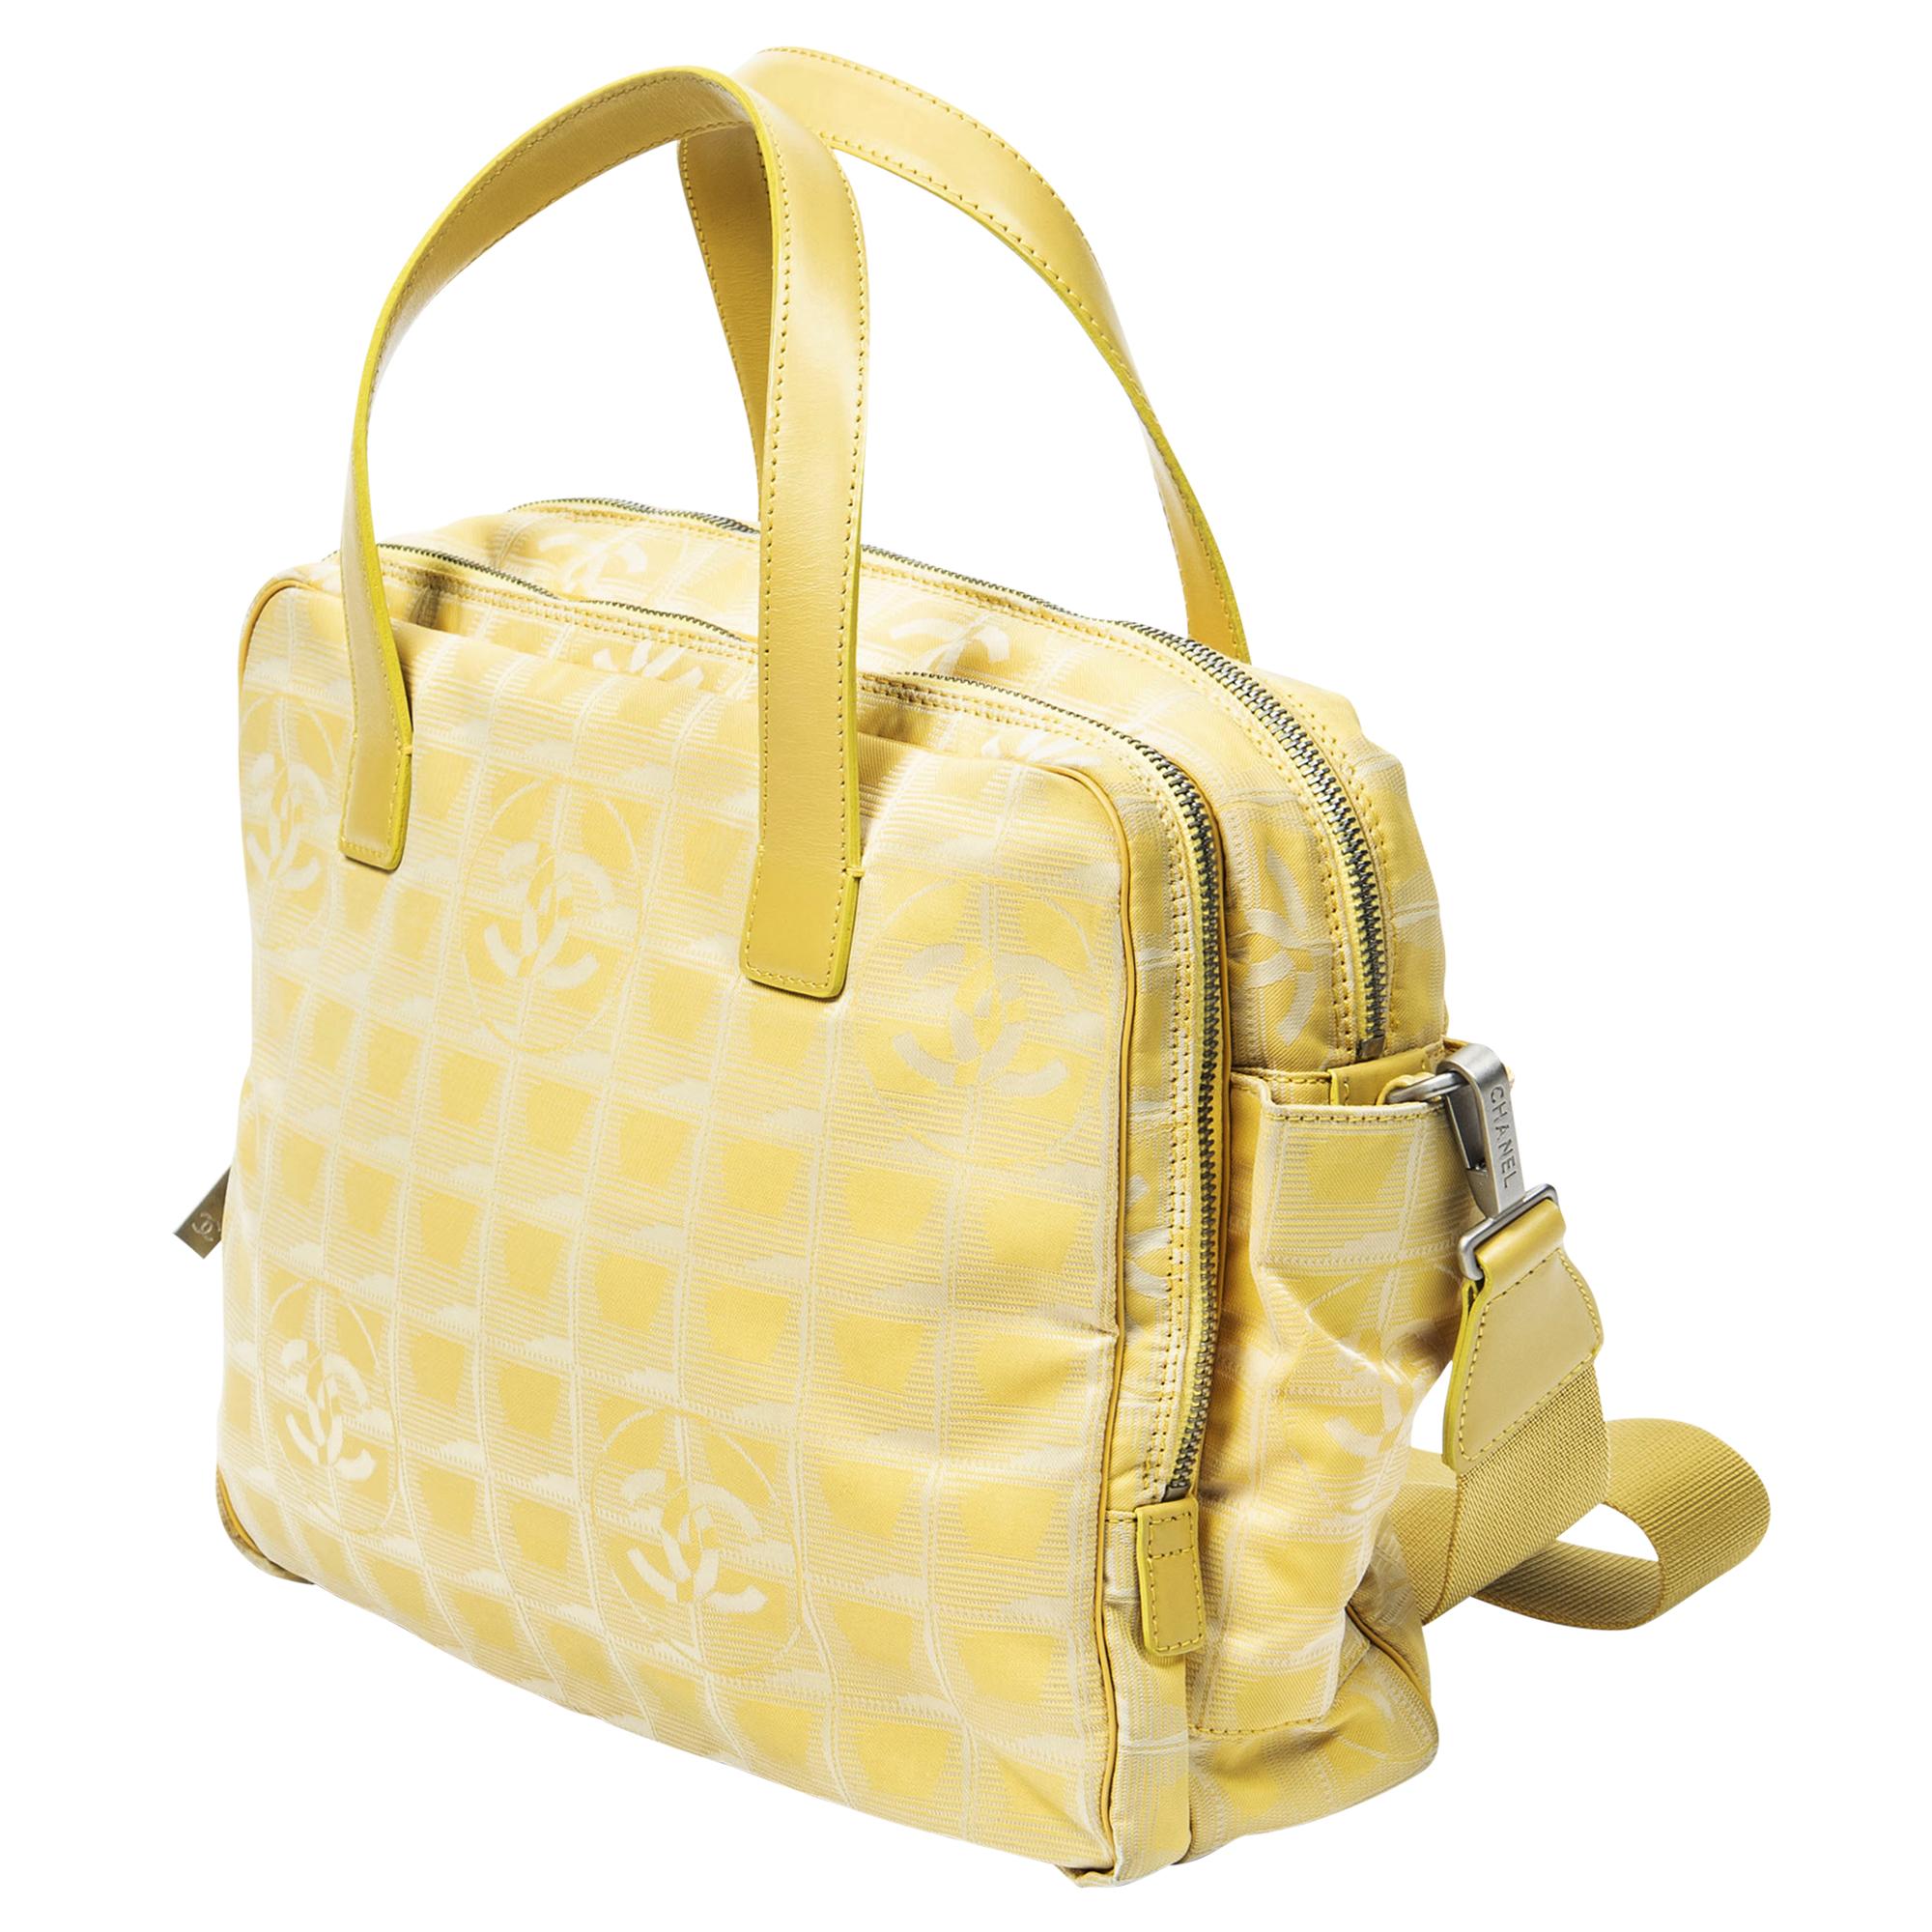 Introducing the Chanel 2002 Yellow Travel Ligne Bag w/ Strap, a vibrant accessory for the fashion-forward explorer. Crafted from durable canvas in a sunny yellow hue, it exudes playful elegance. Enhanced with silver hardware accents, its practical